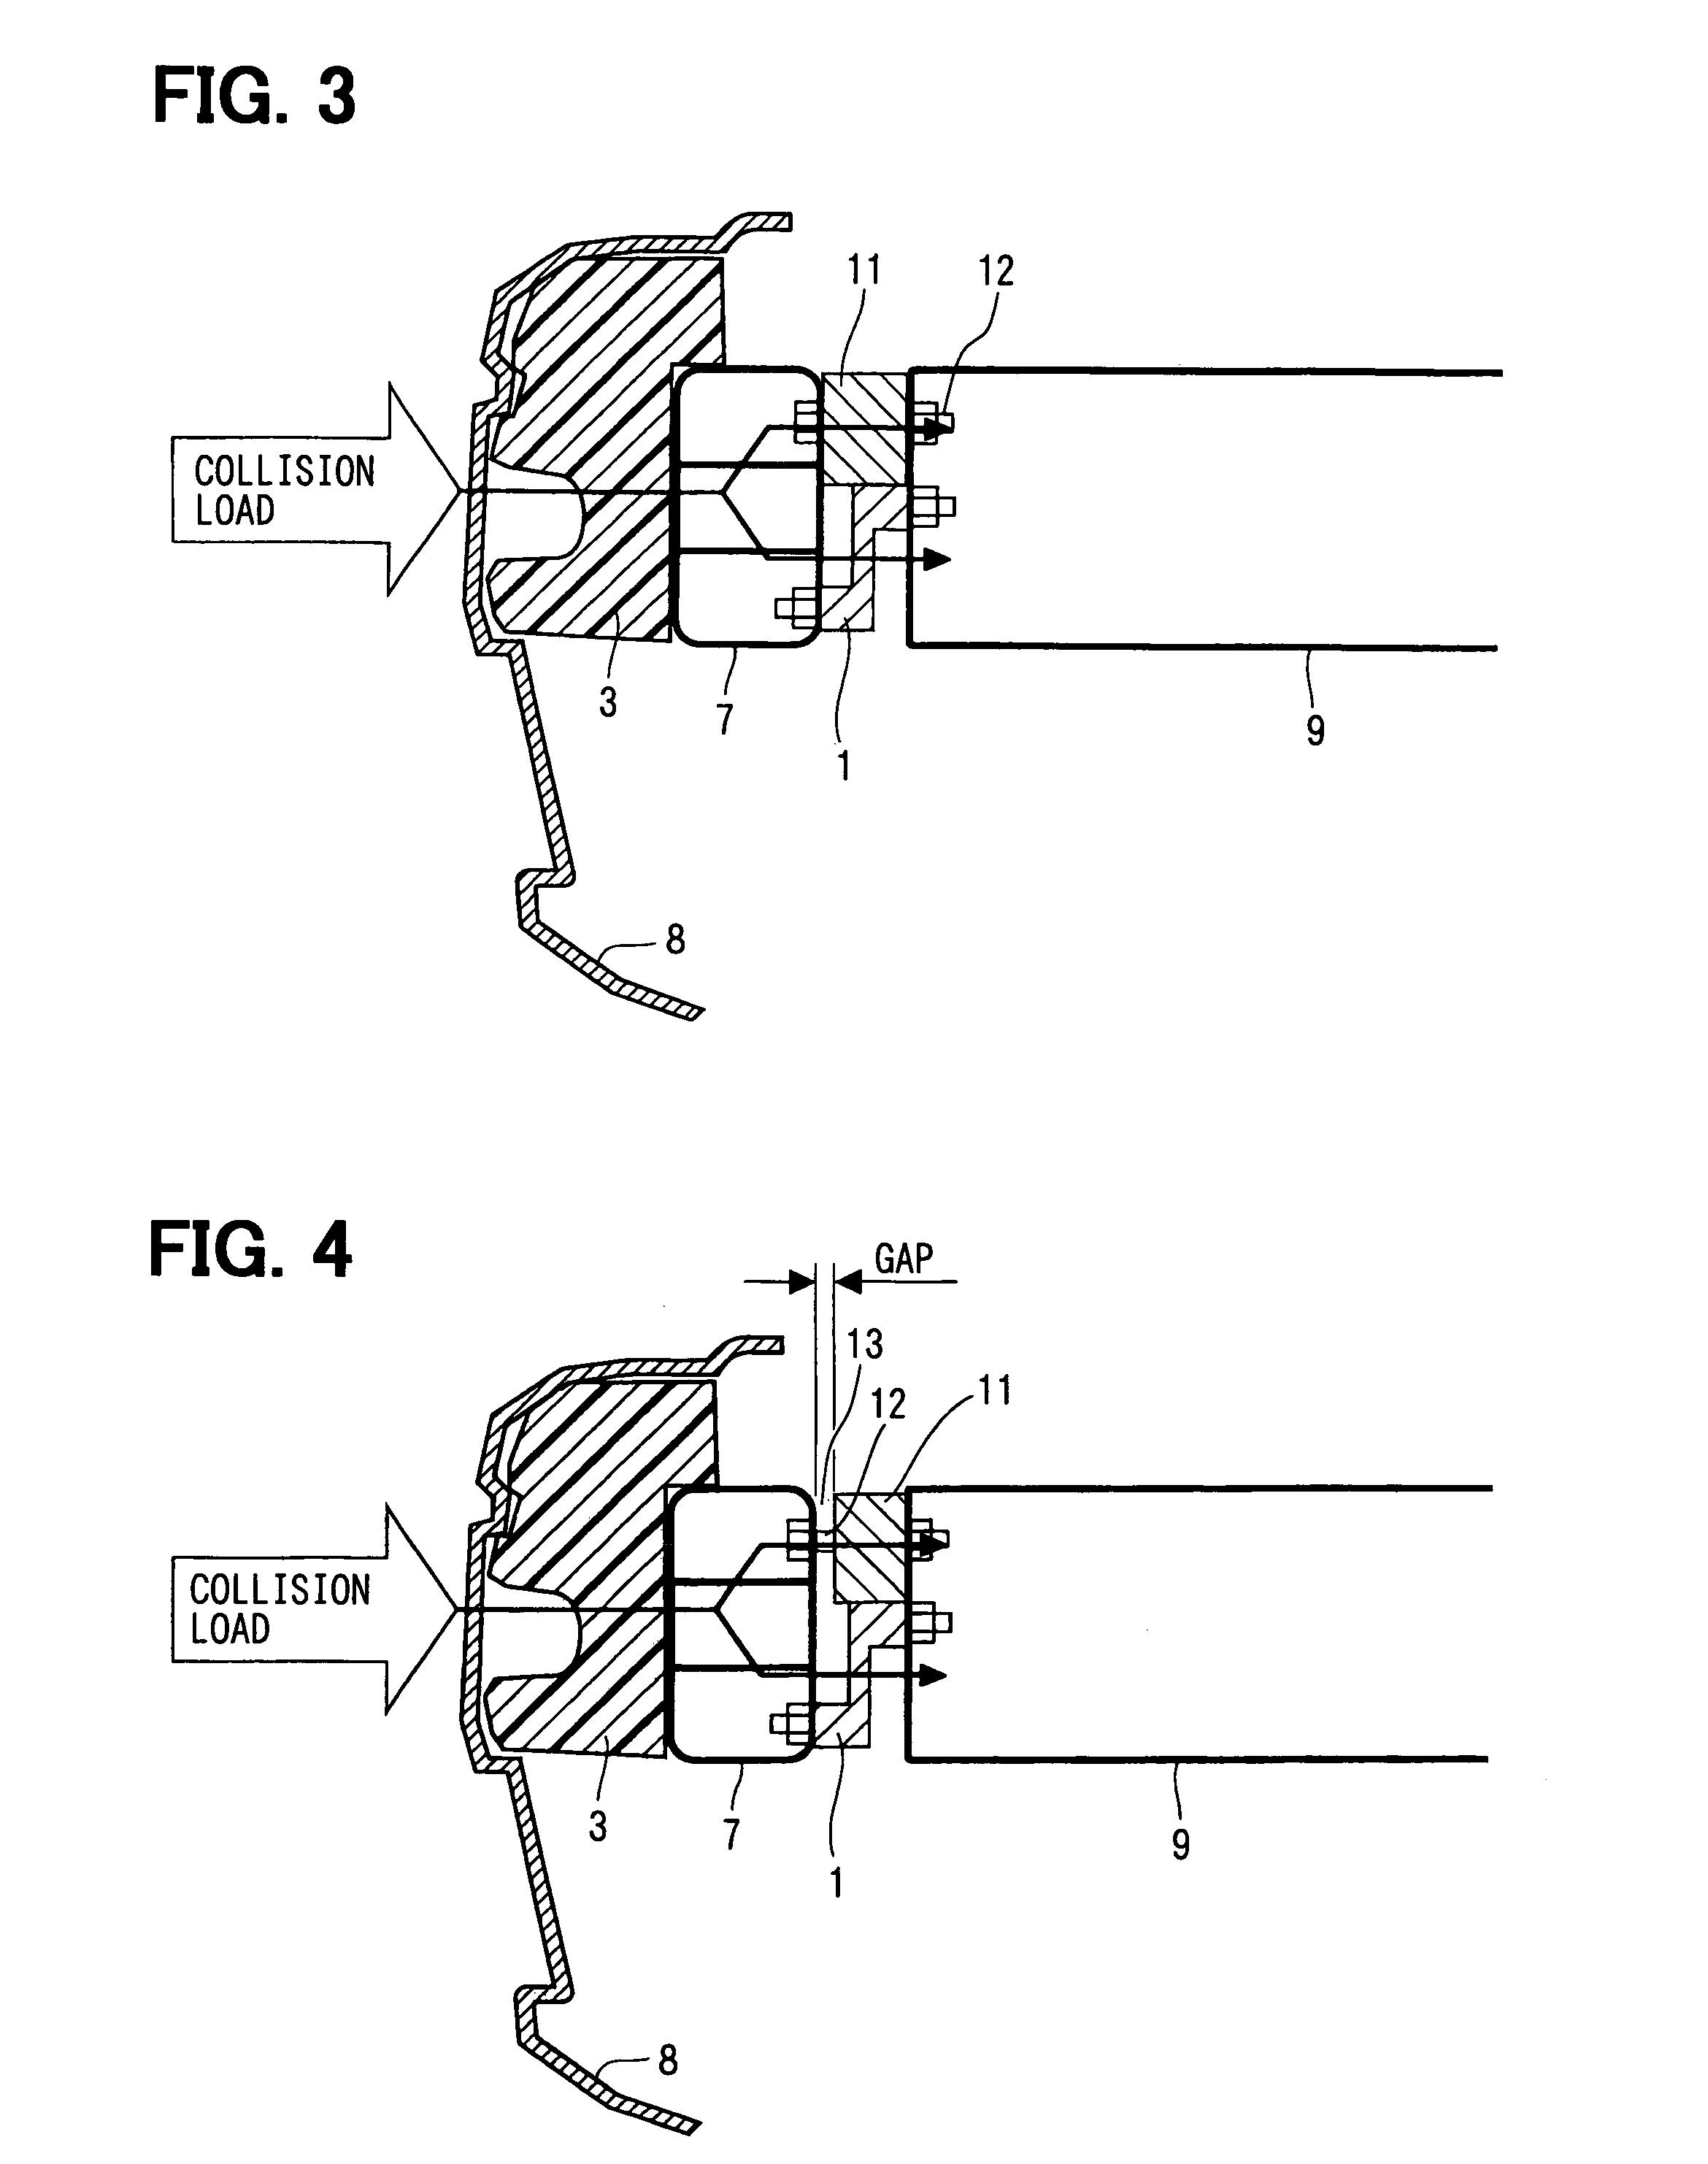 Collision detection system for vehicle